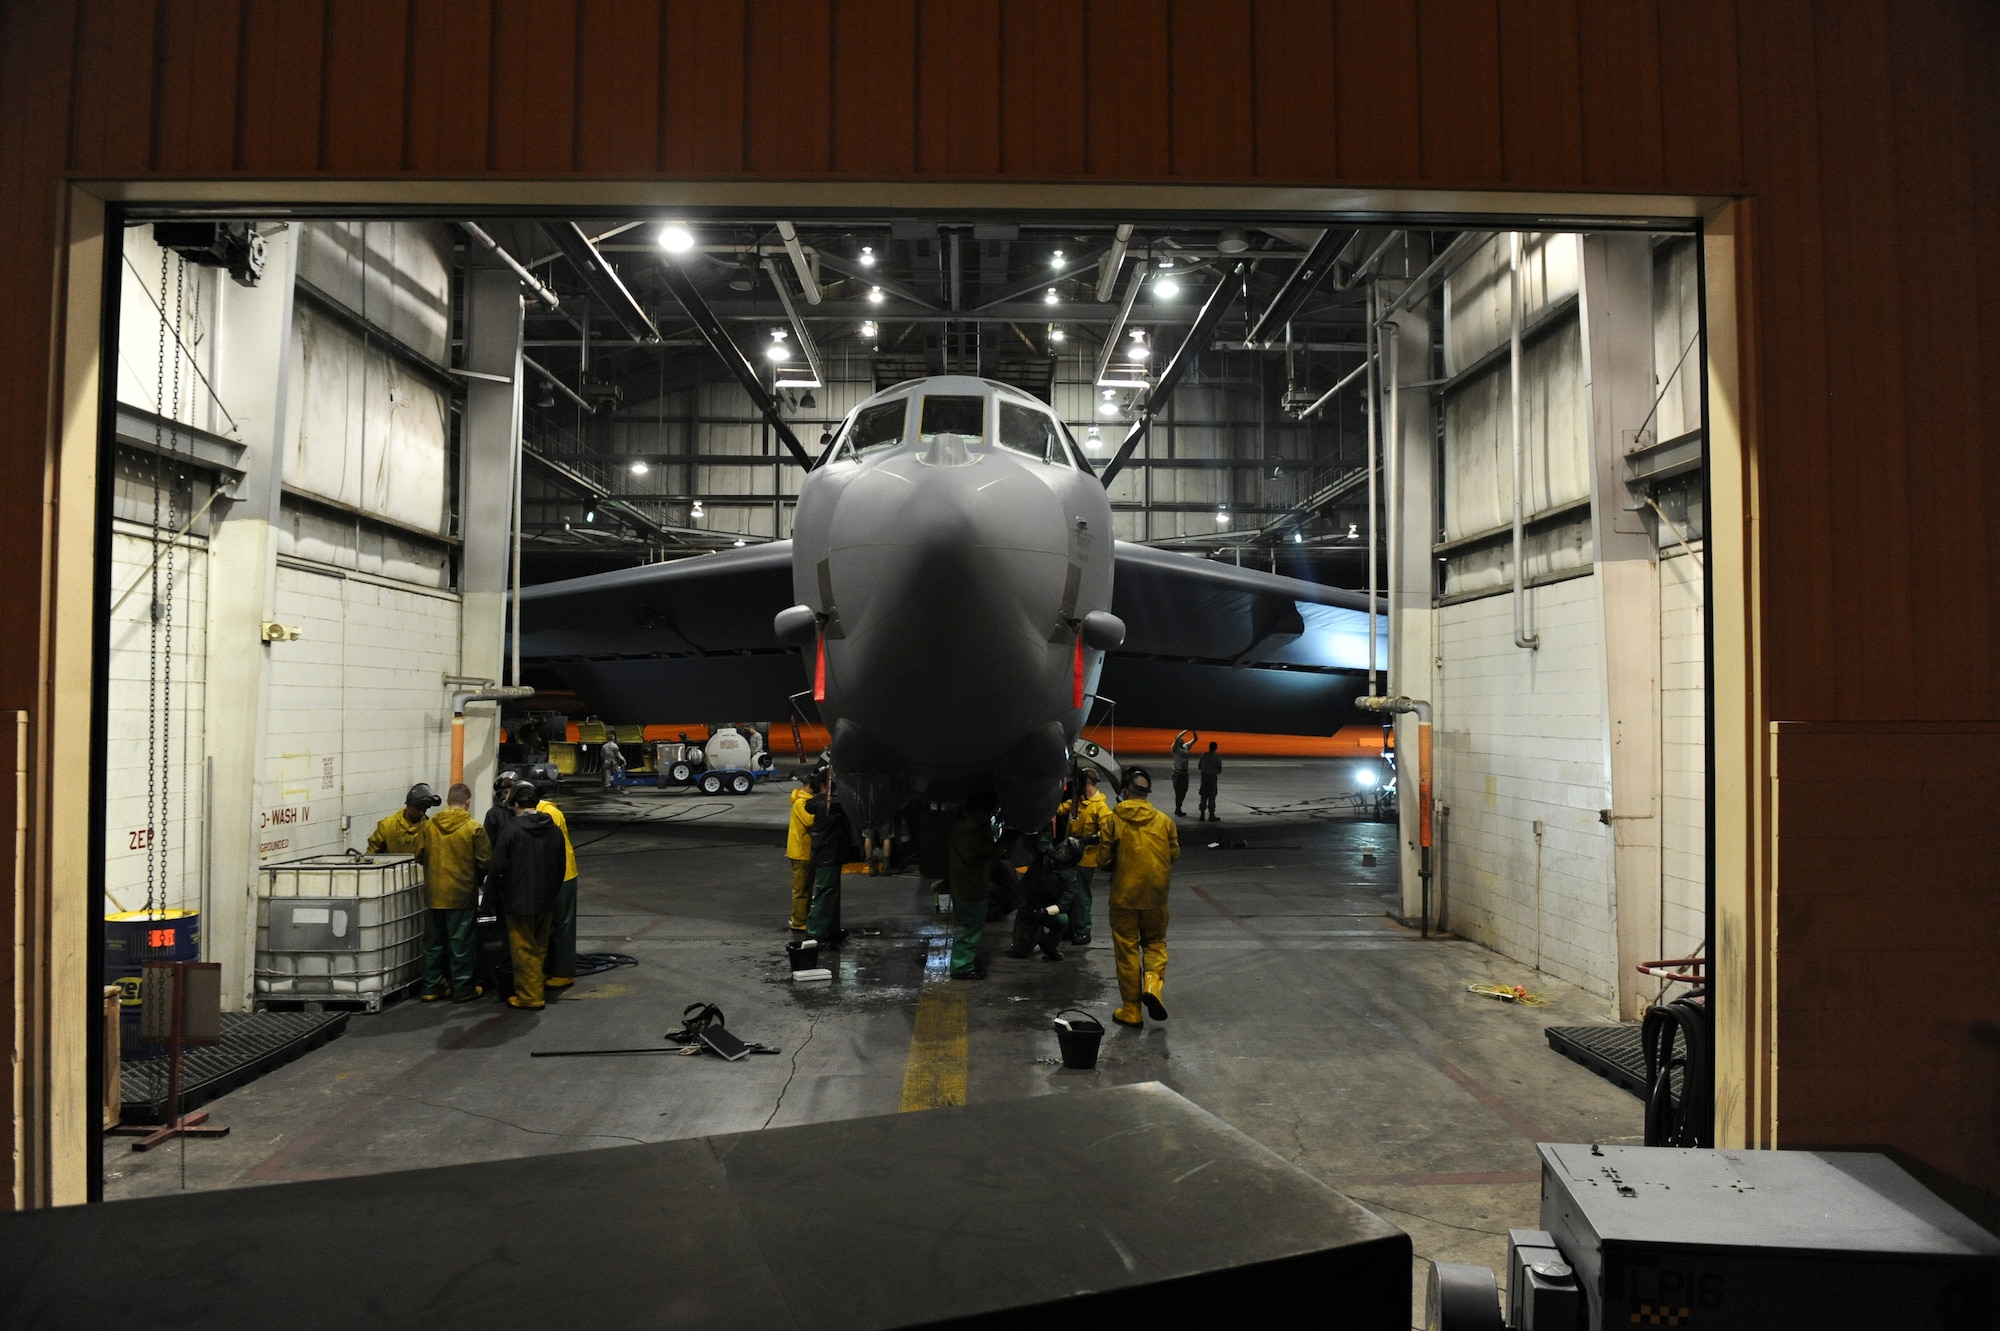 Airmen from the 2nd Maintenance Squadron scrub the bottom of a B-52H Stratofortress in the corrosion hangar on Barksdale Air Force Base, La., Aug. 22. Before every phase inspection, B-52s are cleaned to make the inspection process easier and more efficient. It typically takes 32 Airmen 12 hours to wash the aircraft. (U.S. Air Force photo/Airman 1st Class Micaiah Anthony)(RELEASED)